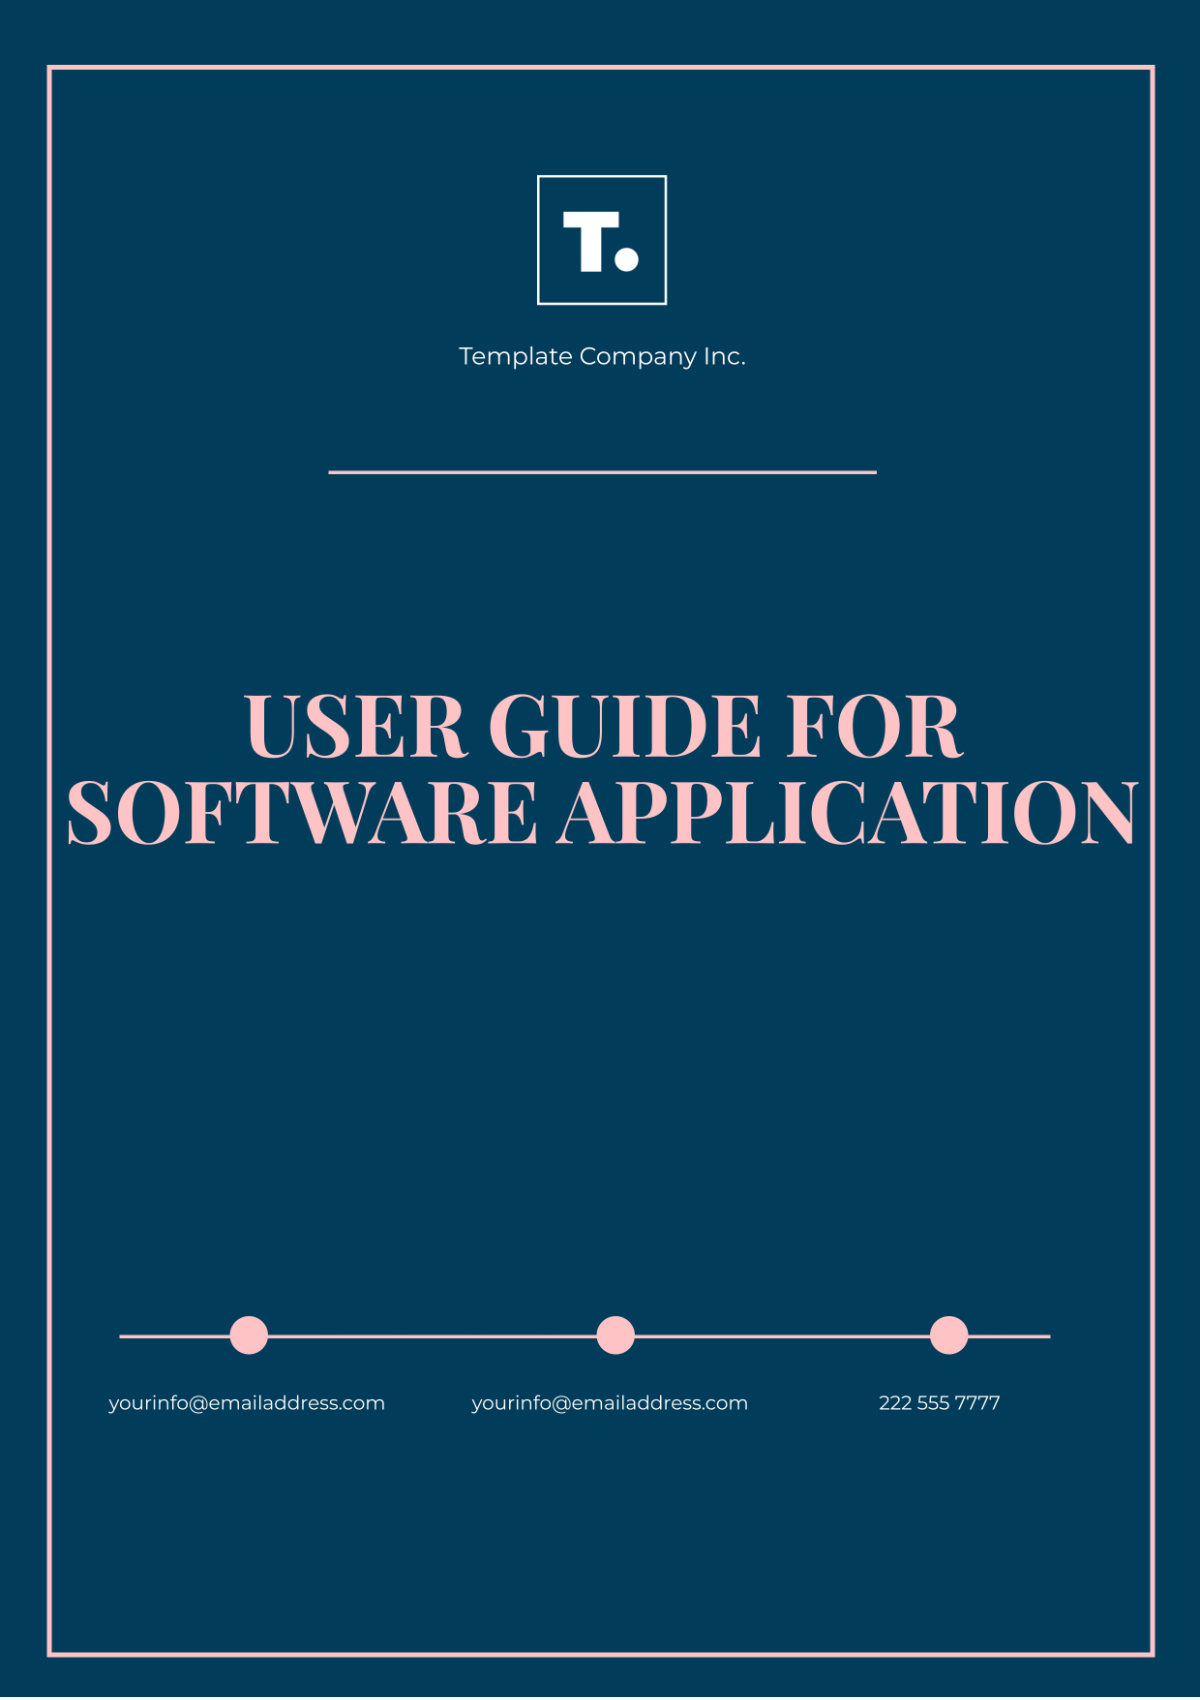 Free User Guide Template For Software Application